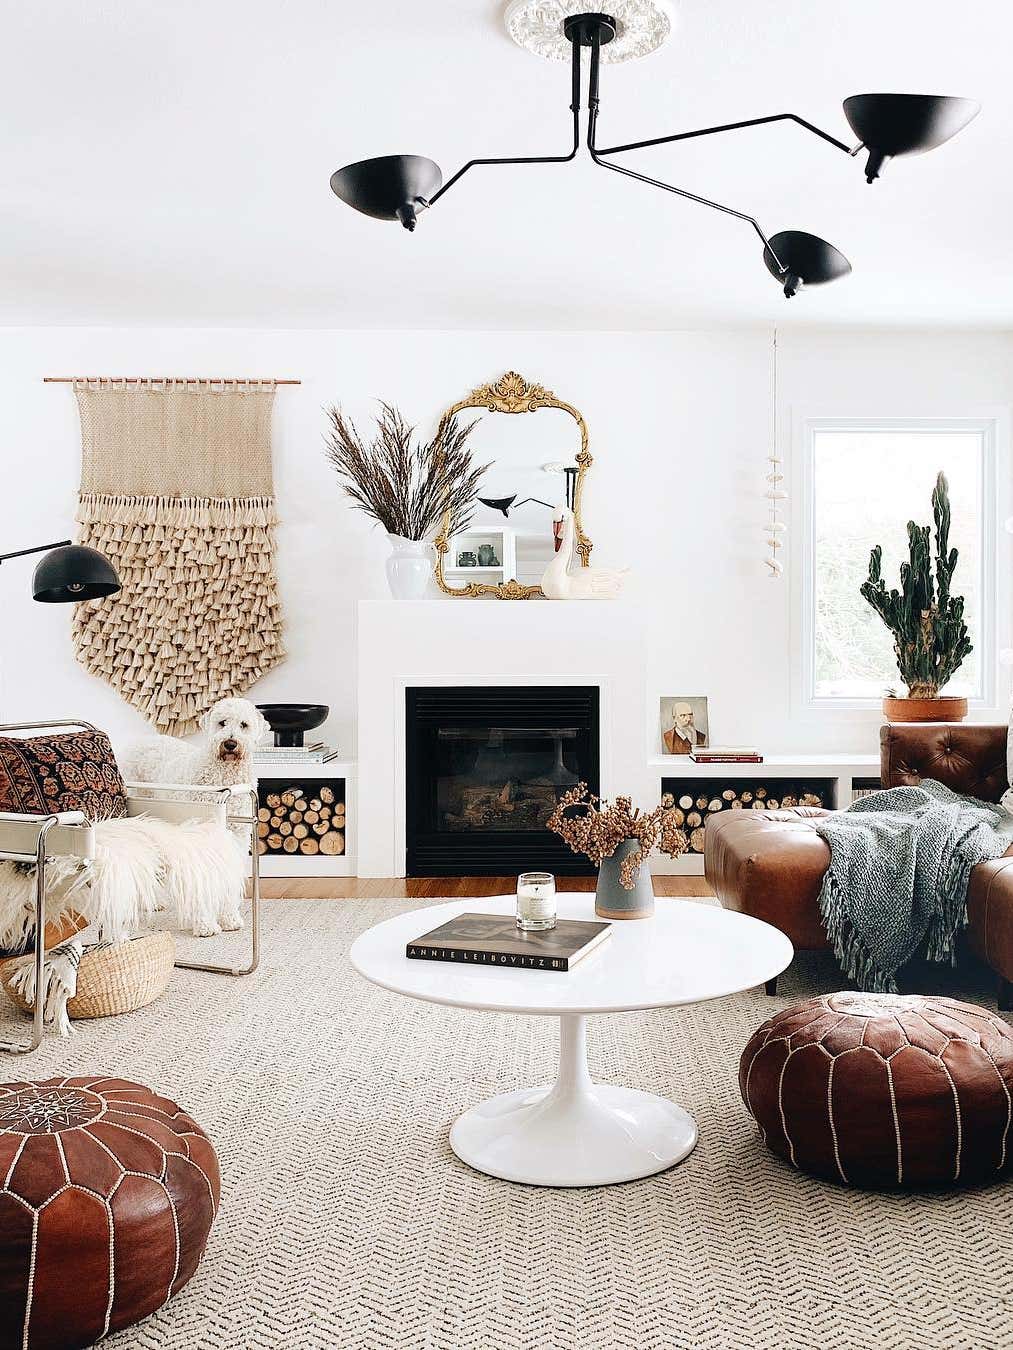 Interior Designers and Stylists Can’t Get Enough of This New Target Line